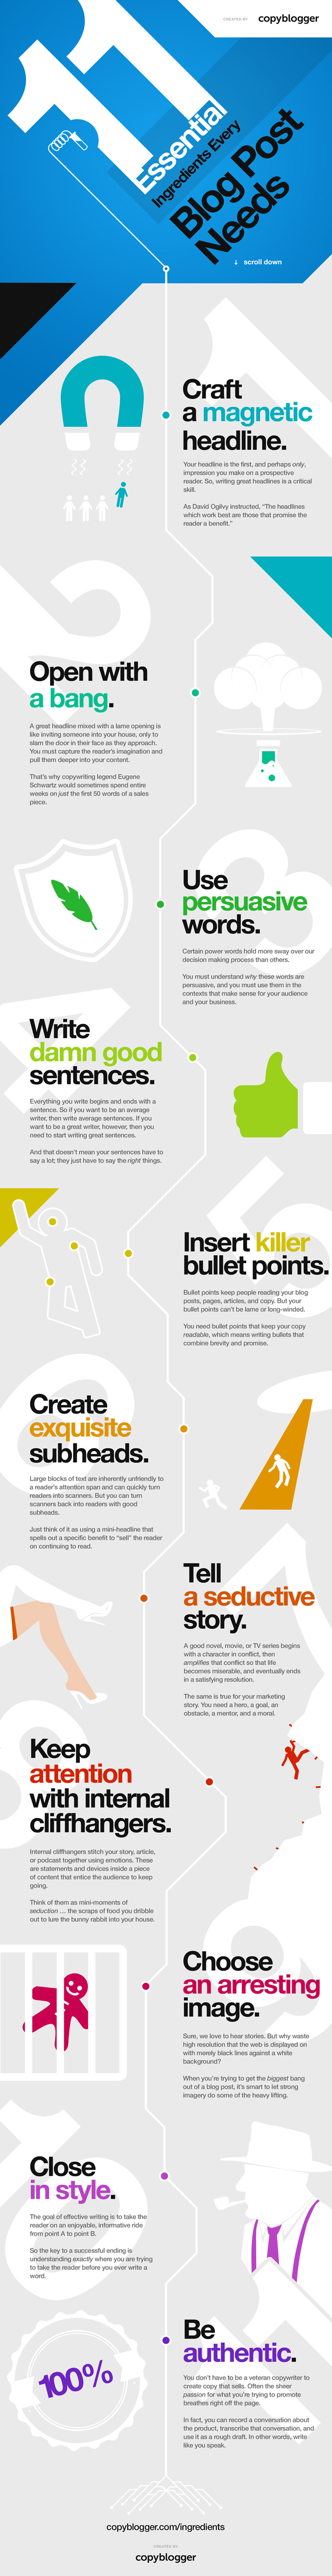 Infographic 11 Essential Ingredients Every Blog Post Needs